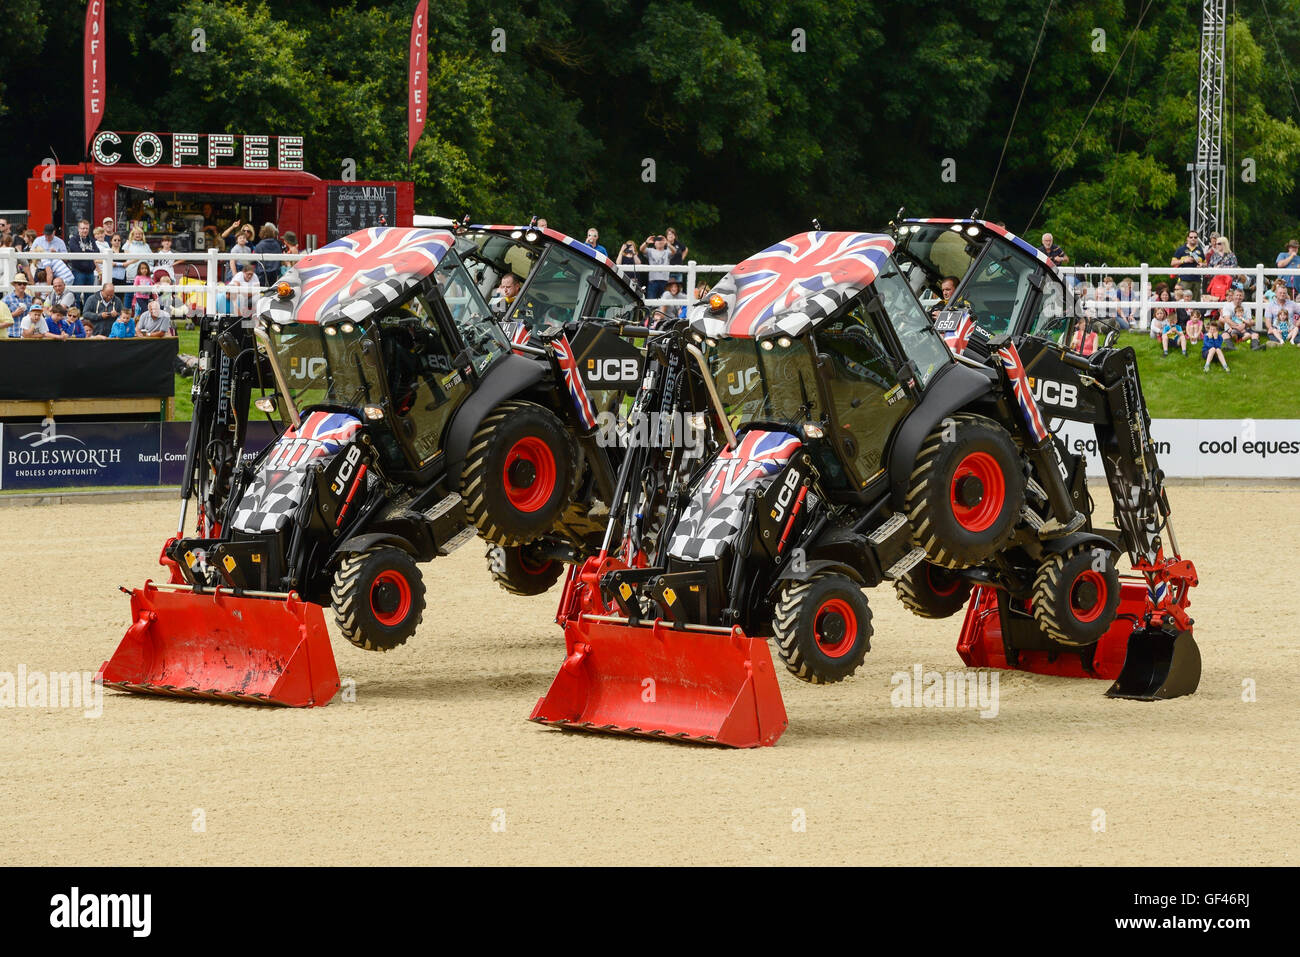 Bolesworth, Cheshire, UK. 29th July 2016. JCB diggers performing in the Showground Arena. The event is the brainchild of Chris Evans and features 3 days of cars, music and entertainment with profits being donated to the charity Children in Need. Credit:  Andrew Paterson/Alamy Live News Stock Photo